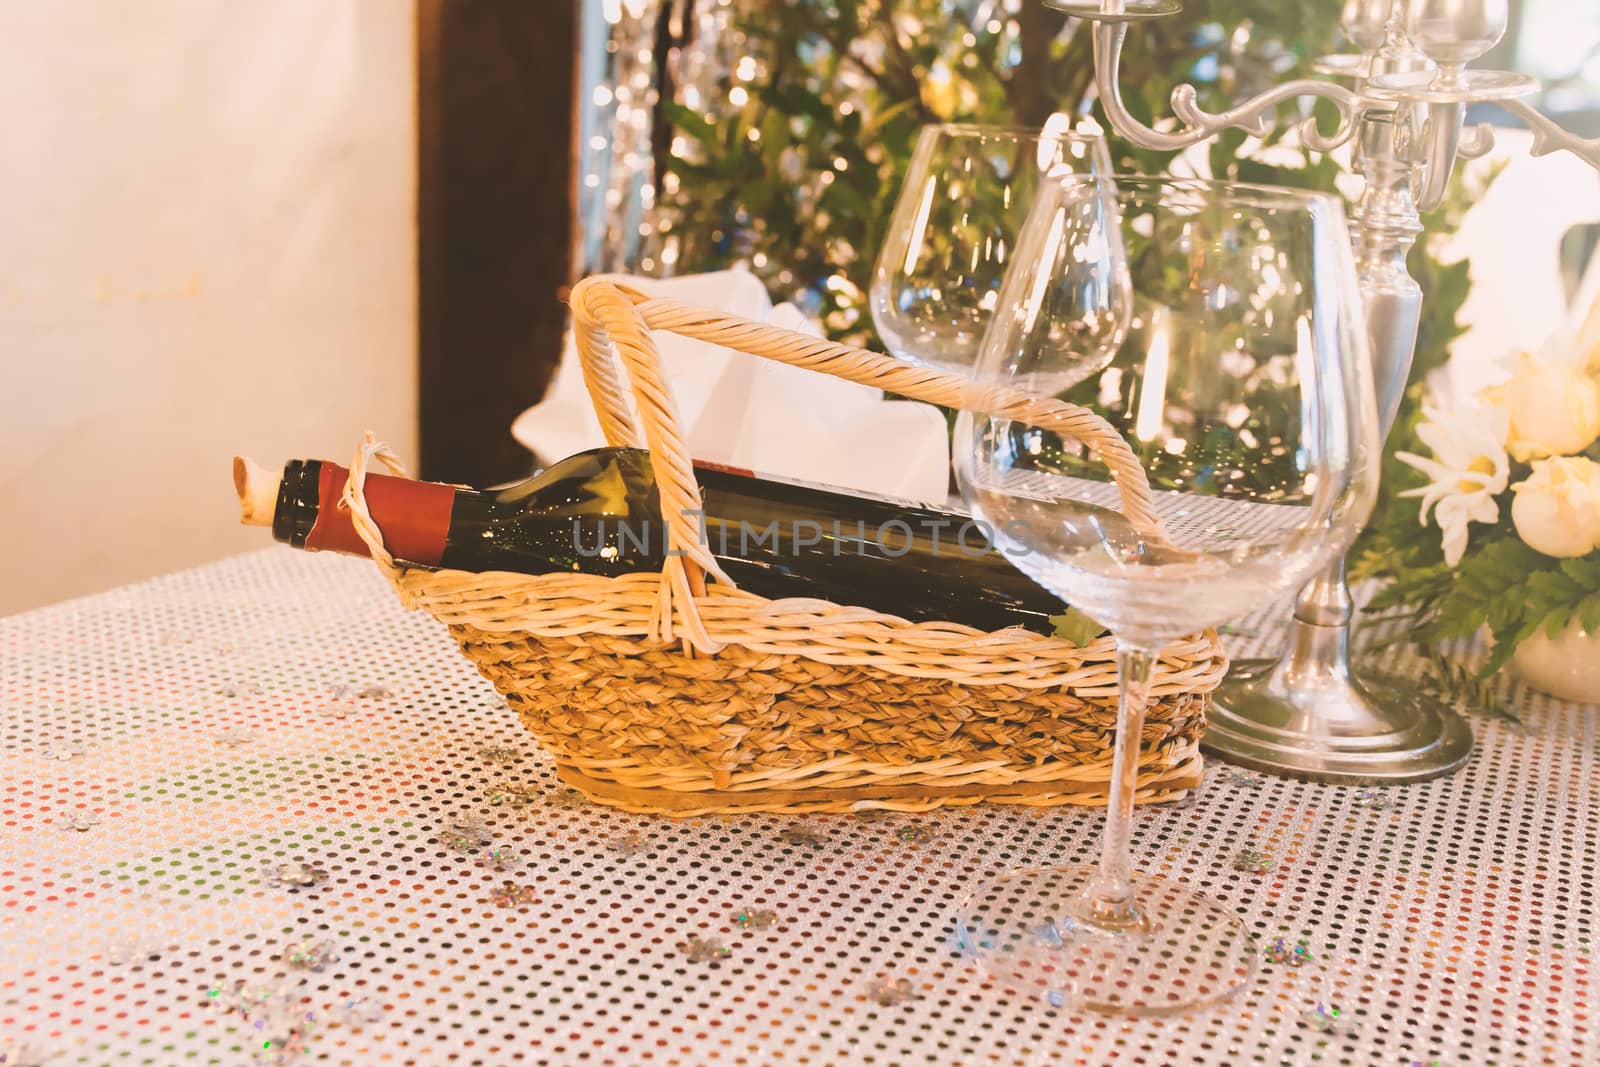 Bottle of wine on wood basket and Glasses on table by nopparats